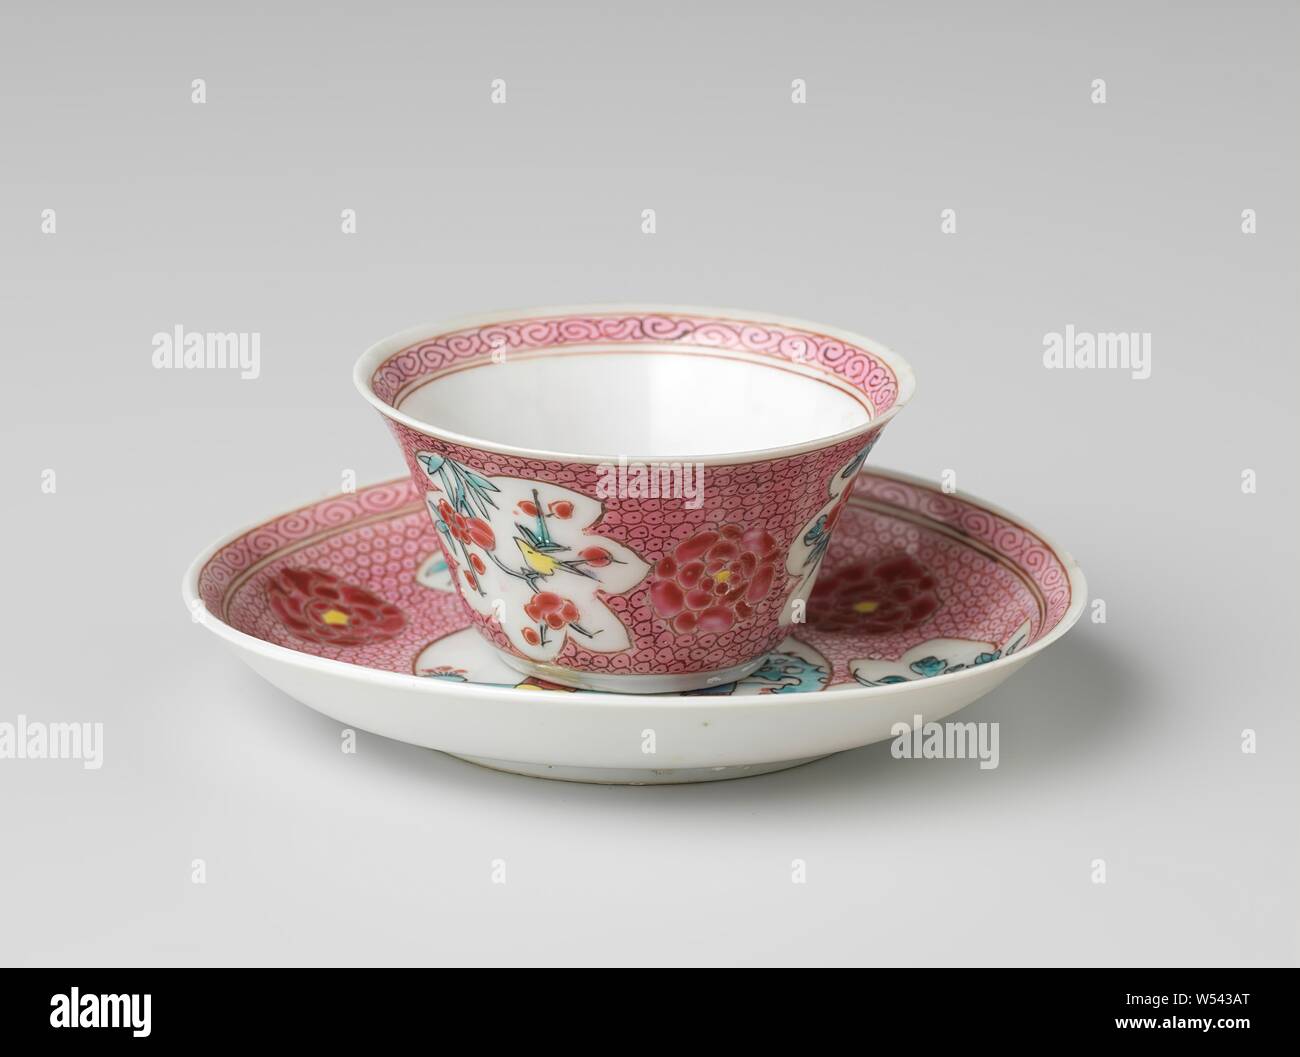 Cup and saucer with a Chinese lady and boy in a landscape and flower sprays on diaper pattern, Porcelain cup and saucer with a spreading wall, painted on the glaze in blue, red, pink, green, yellow and black. On the plate of the dish a medallion with a Chinese lady and a boy in a landscape with trees and rocks, the medallion napkin with three flowers and three cartouches with a bird or insect on a flower branch (prunus, peony, lotus), the inner edge with a curled band. The cup with the same decoration. A crack in the wall of the head. Famille rose., anonymous, China, c. 1725 - c. 1749, Qing Stock Photo